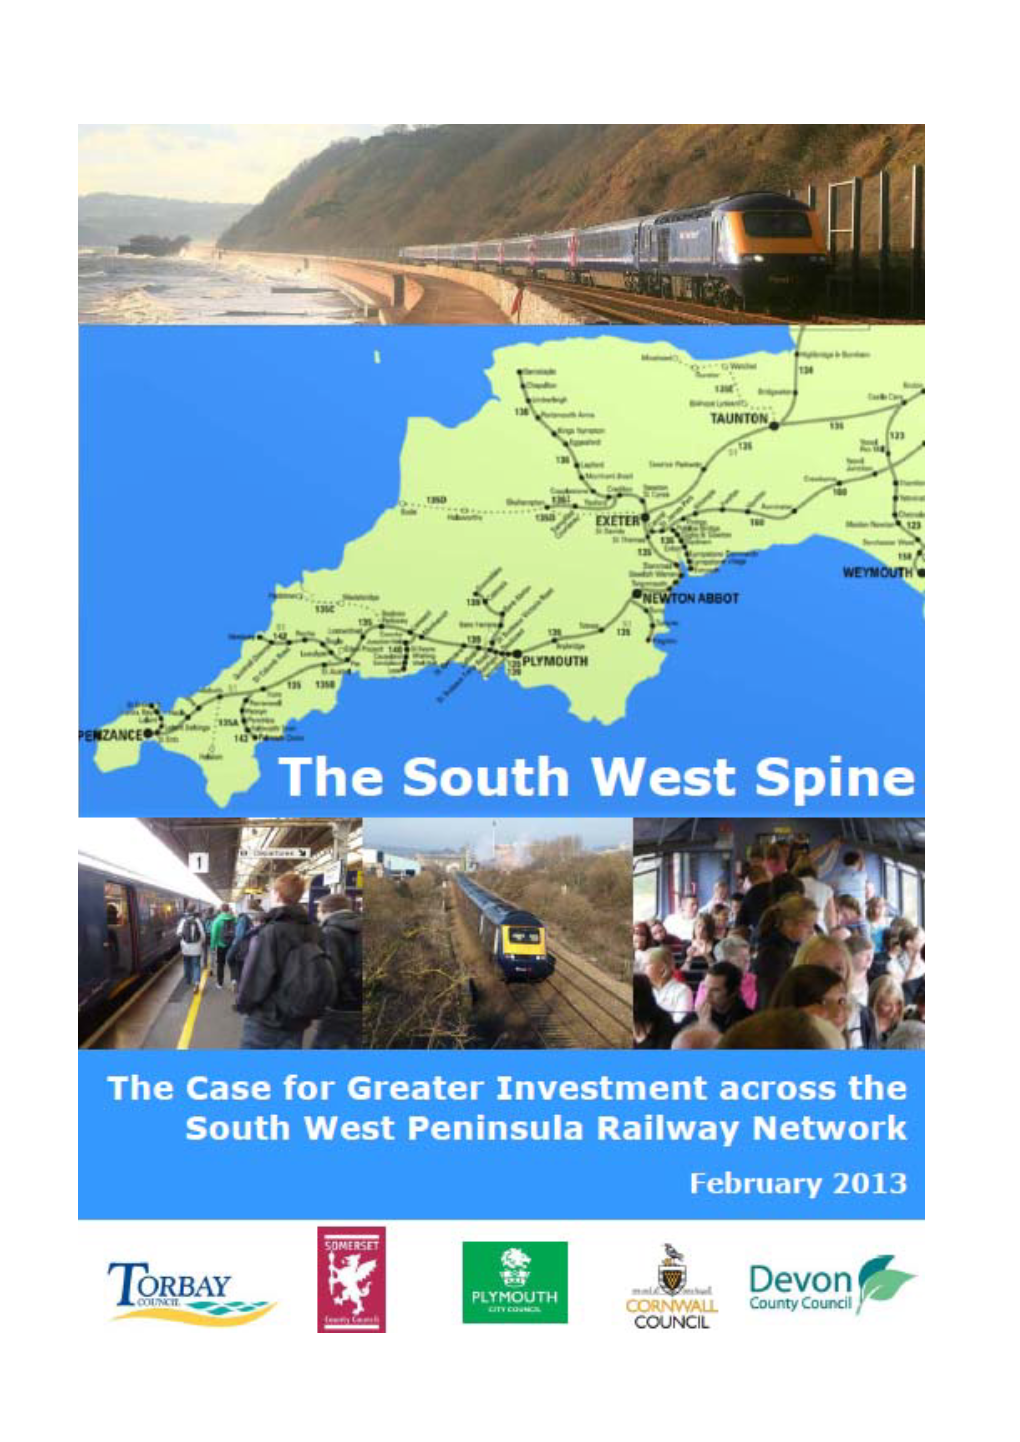 The South West Spine